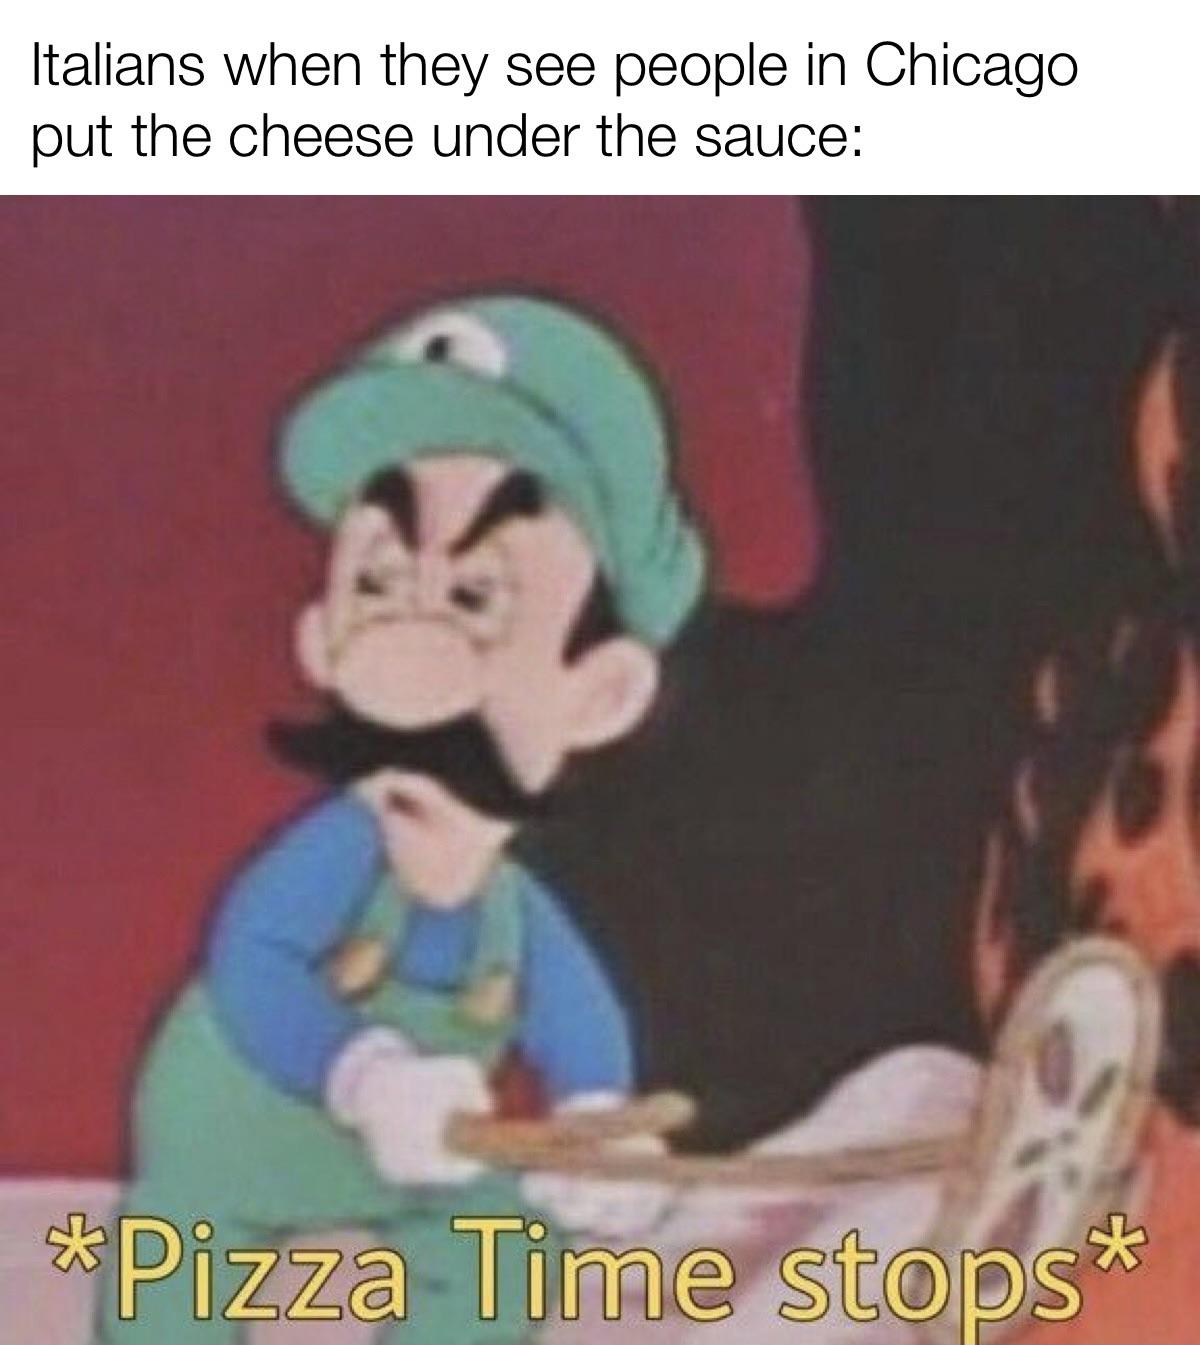 fresh memes - luigi pizza time stops meme - Italians when they see people in Chicago put the cheese under the sauce Pizza Time stops